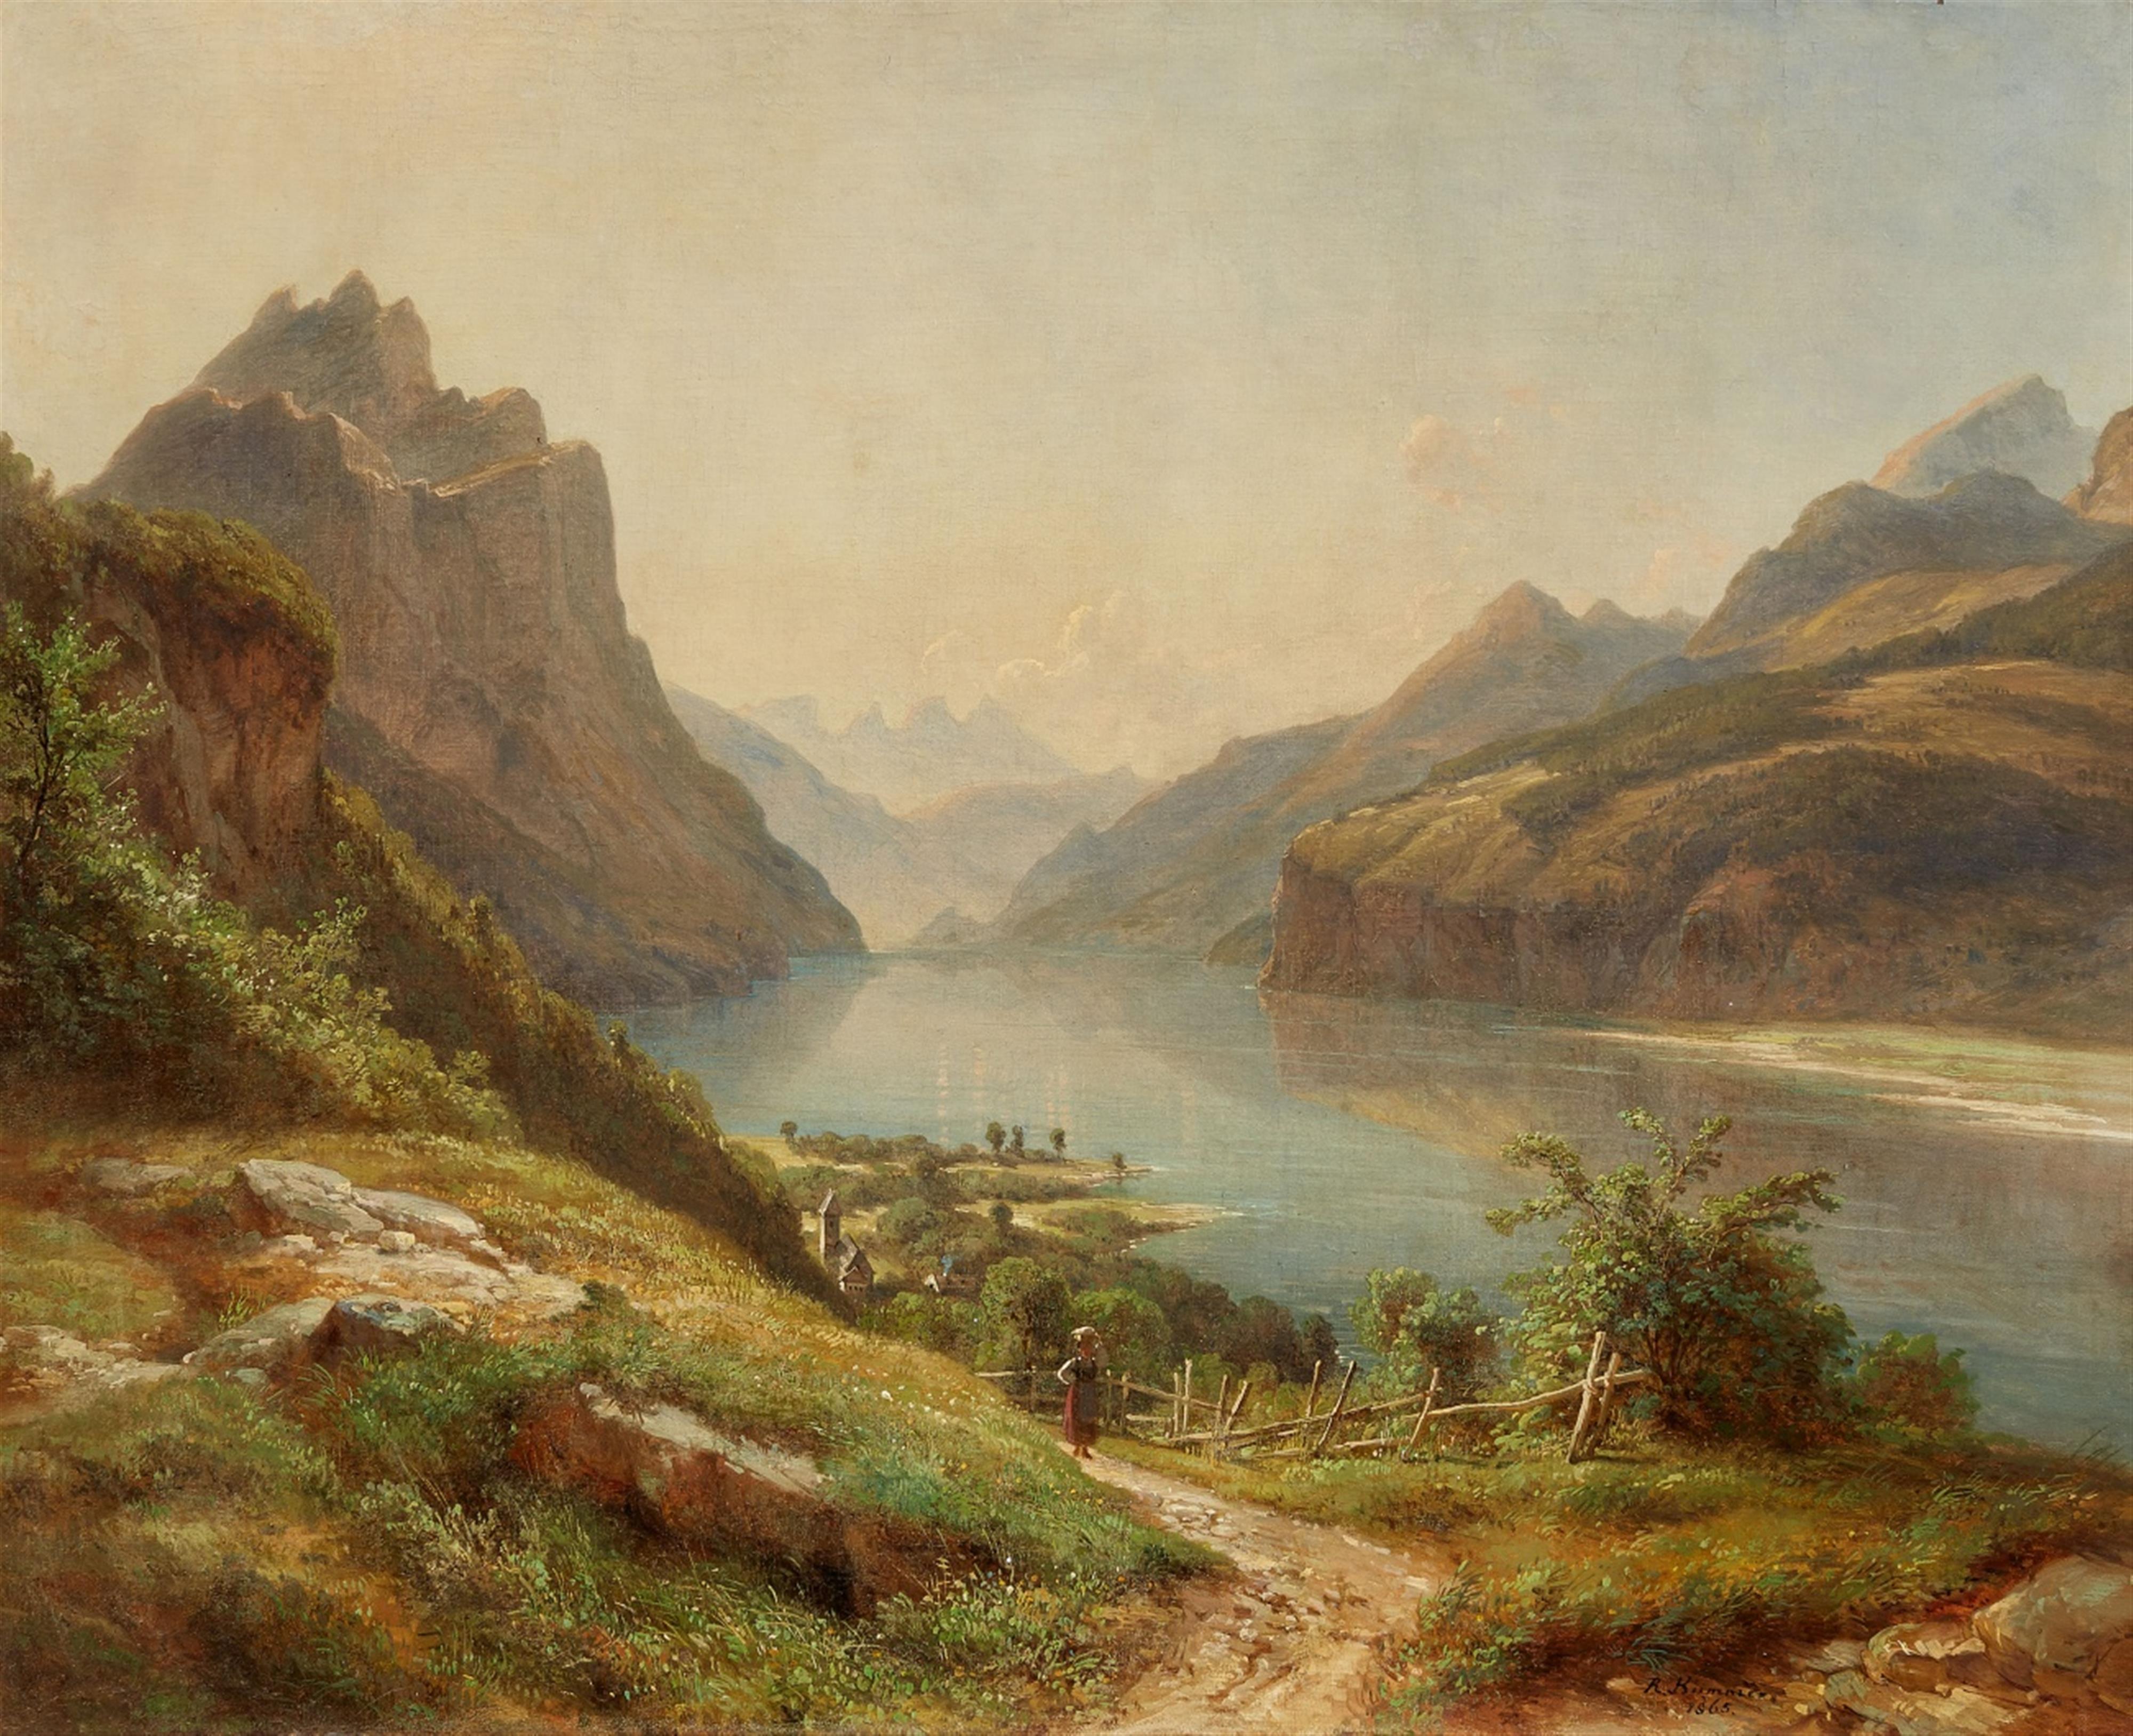 Robert Kummer - View of a Mountain Lake (possibly Lago Maggiore) - image-1